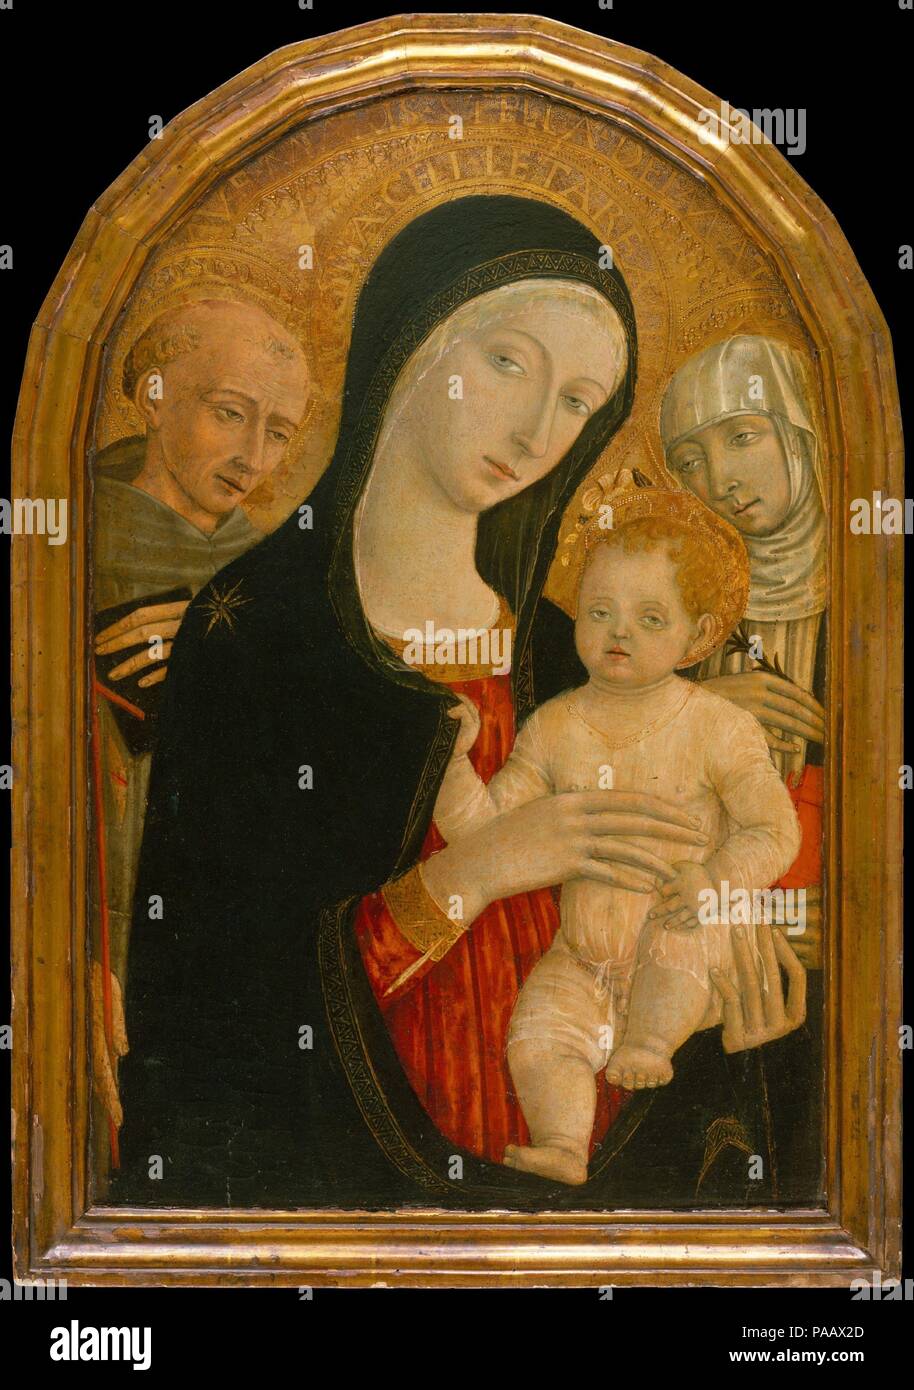 Madonna and Child with Saints Francis and Catherine of Siena. Artist: Matteo di Giovanni di Bartolo (Italian, Siena ca. 1430-1497 Siena). Dimensions: 25 3/4 x 16 7/8 in. (65.4 x 42.9 cm). Date: about 1476-80. Museum: Metropolitan Museum of Art, New York, USA. Stock Photo